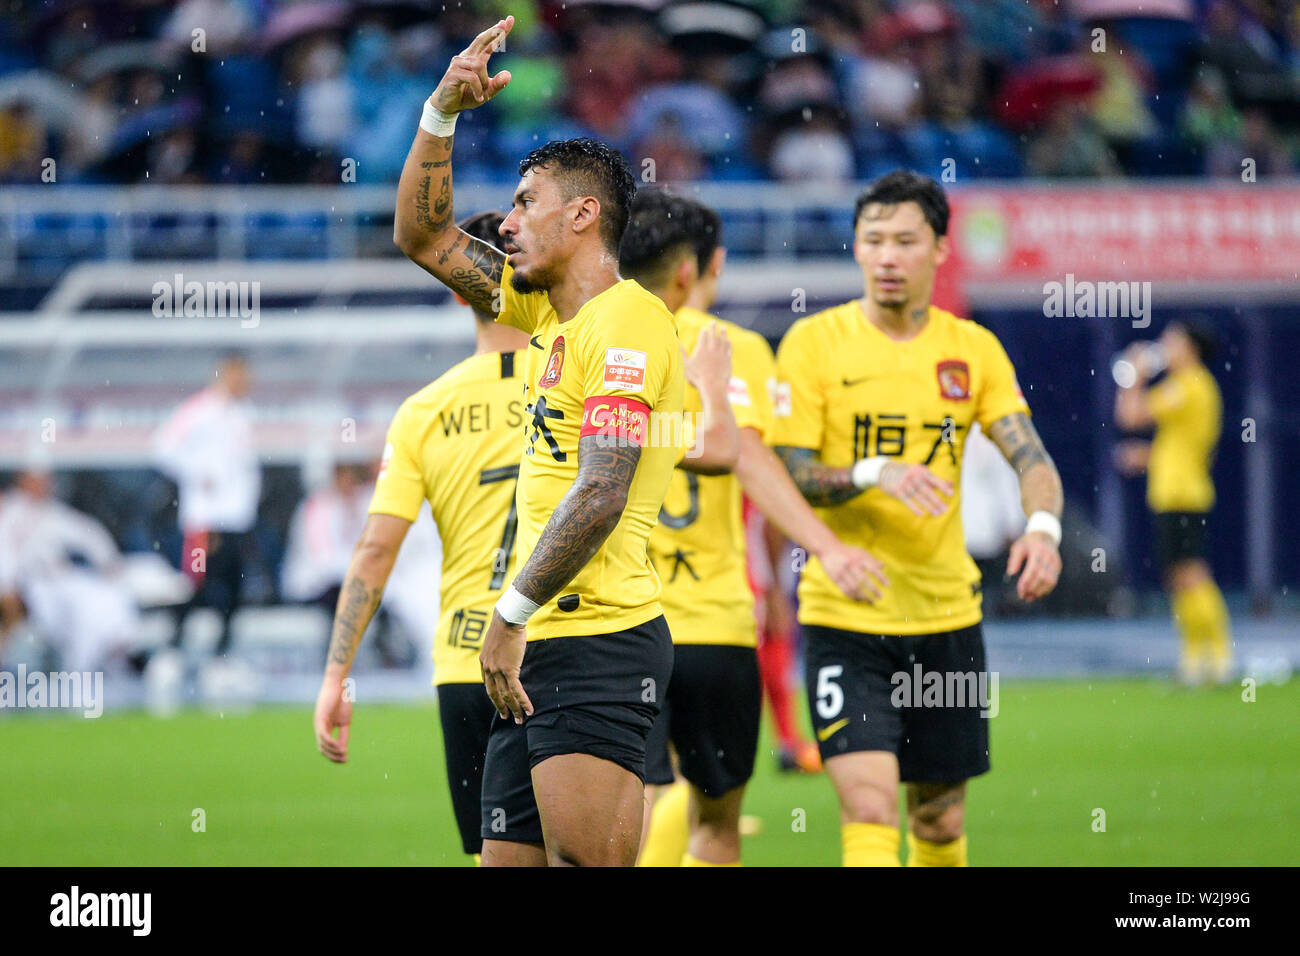 Brazilian football player Paulinho of Guangzhou Evergrande Taobao celebrates after scoring against Tianjin Tianhai in their 15th round match during the 2019 Chinese Football Association Super League (CSL) in Tianjin, China, 5 July 2019. Guangzhou Evergrande Taobao defeated Tianjin Tianhai 3-0. Stock Photo